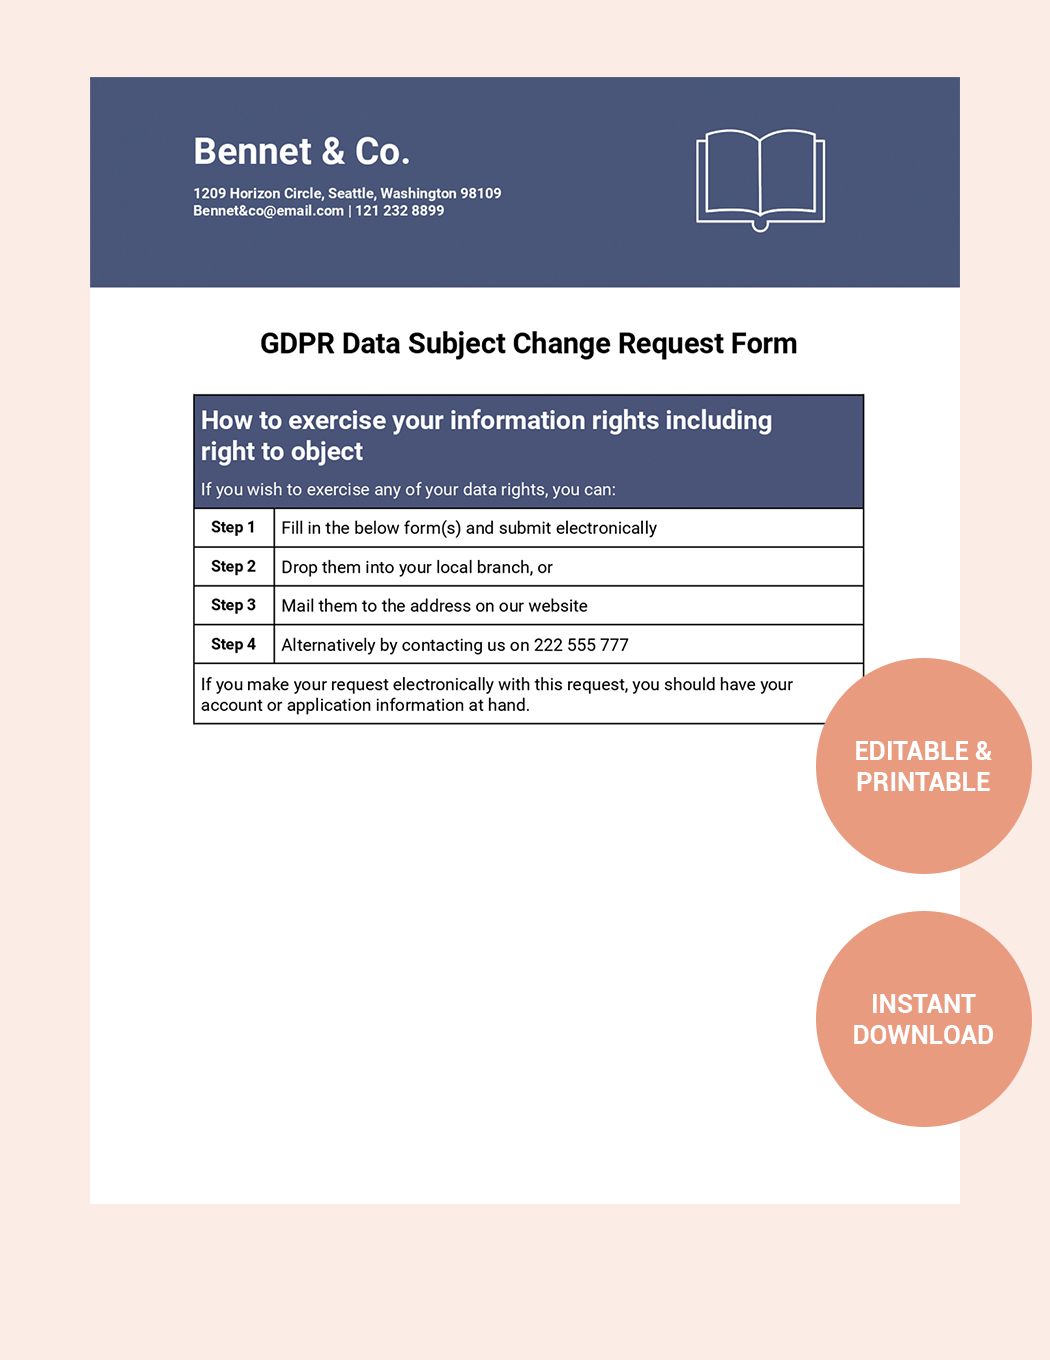 GDPR Data Subject Change Request Form